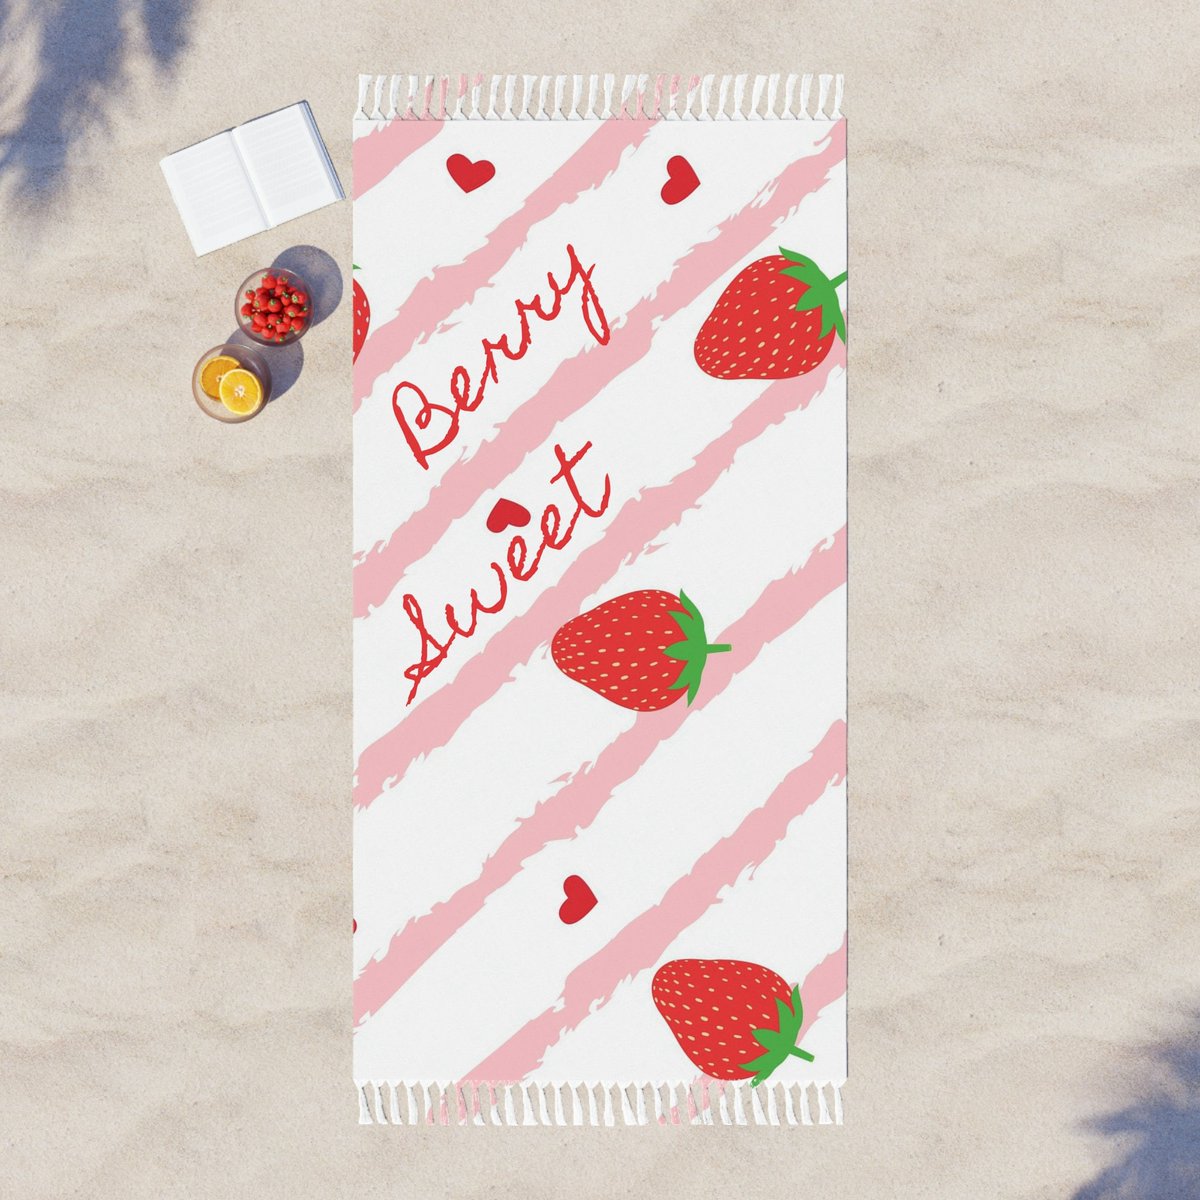 Excited to share the latest addition to my #etsy shop: Berry Sweet Boho Beach Cloth: Embrace the Strawberry Infused Bohemian Vibe for a Delightfully Fresh and Stylish Beach Experience etsy.me/42DQDdu #berrysweet #bohobeachcloth #strawberryinfused #bohemianvibe